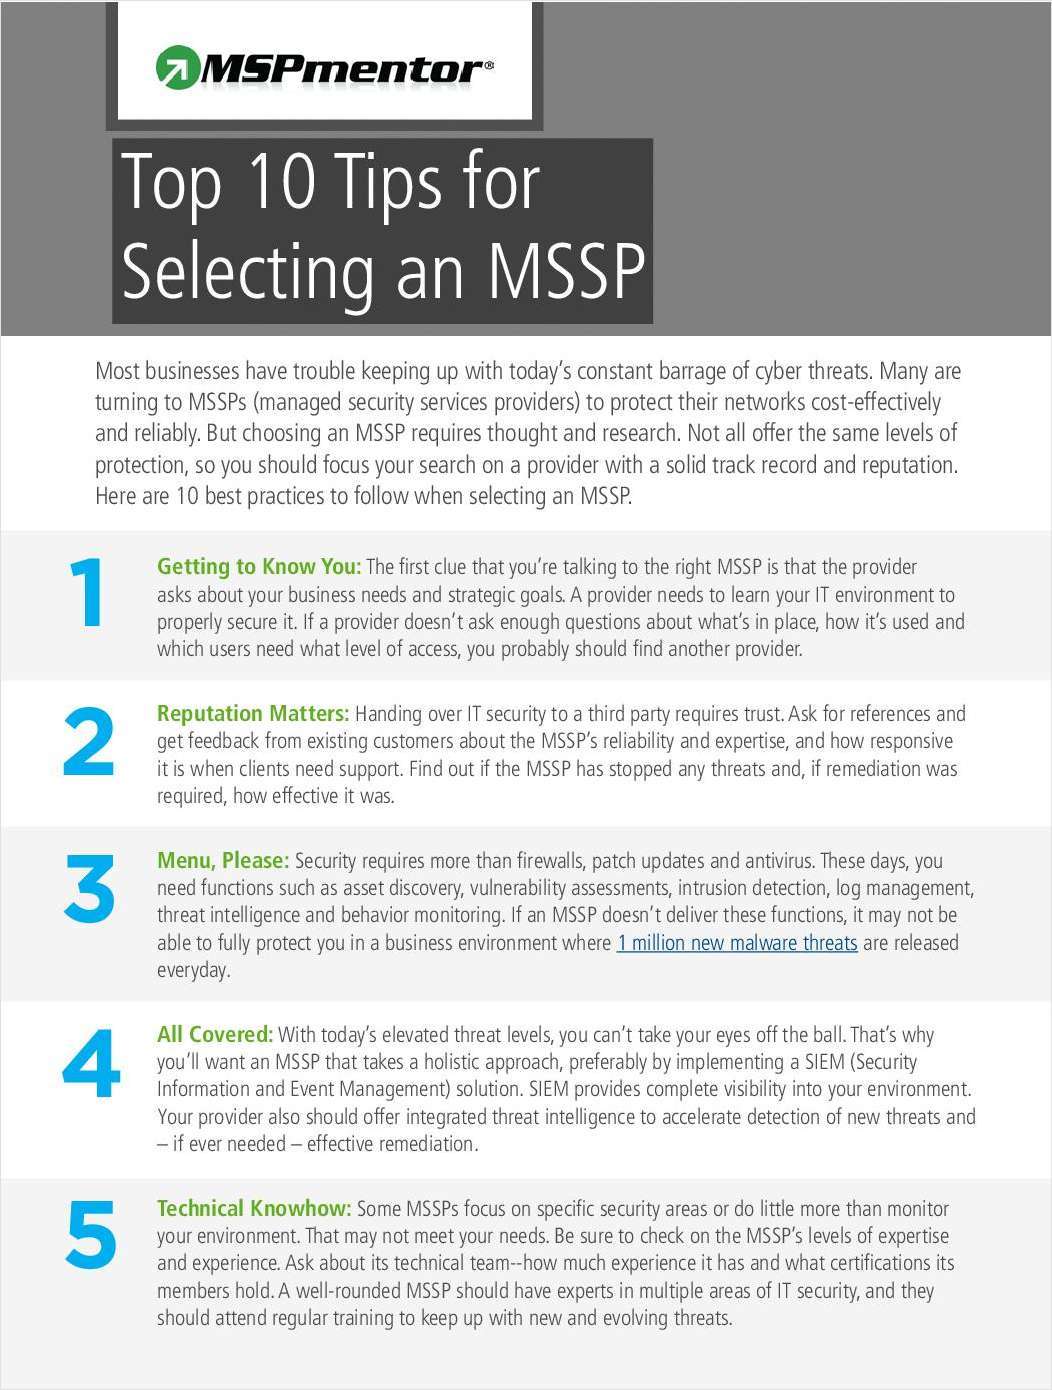 10 Tips for Selecting a Managed Security Service Provider (MSSP)